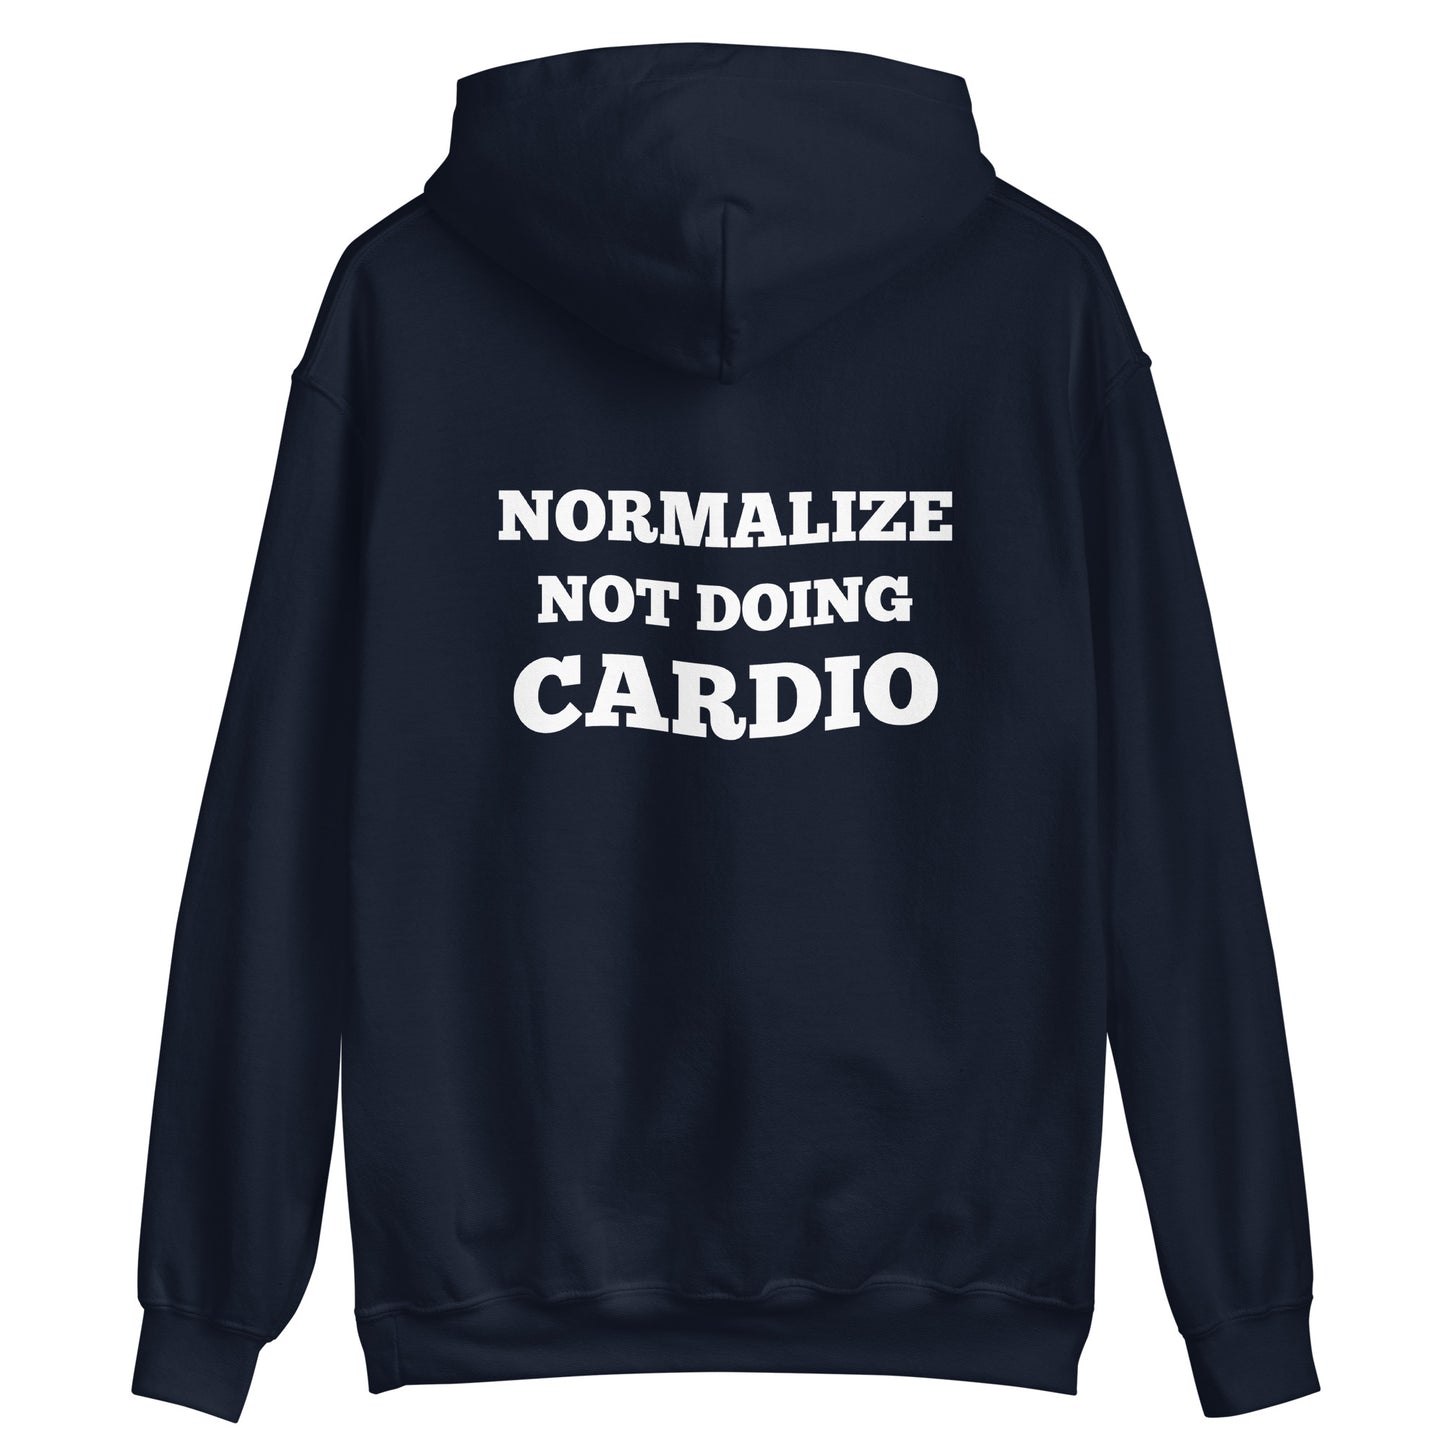 Normalize not doing cardio